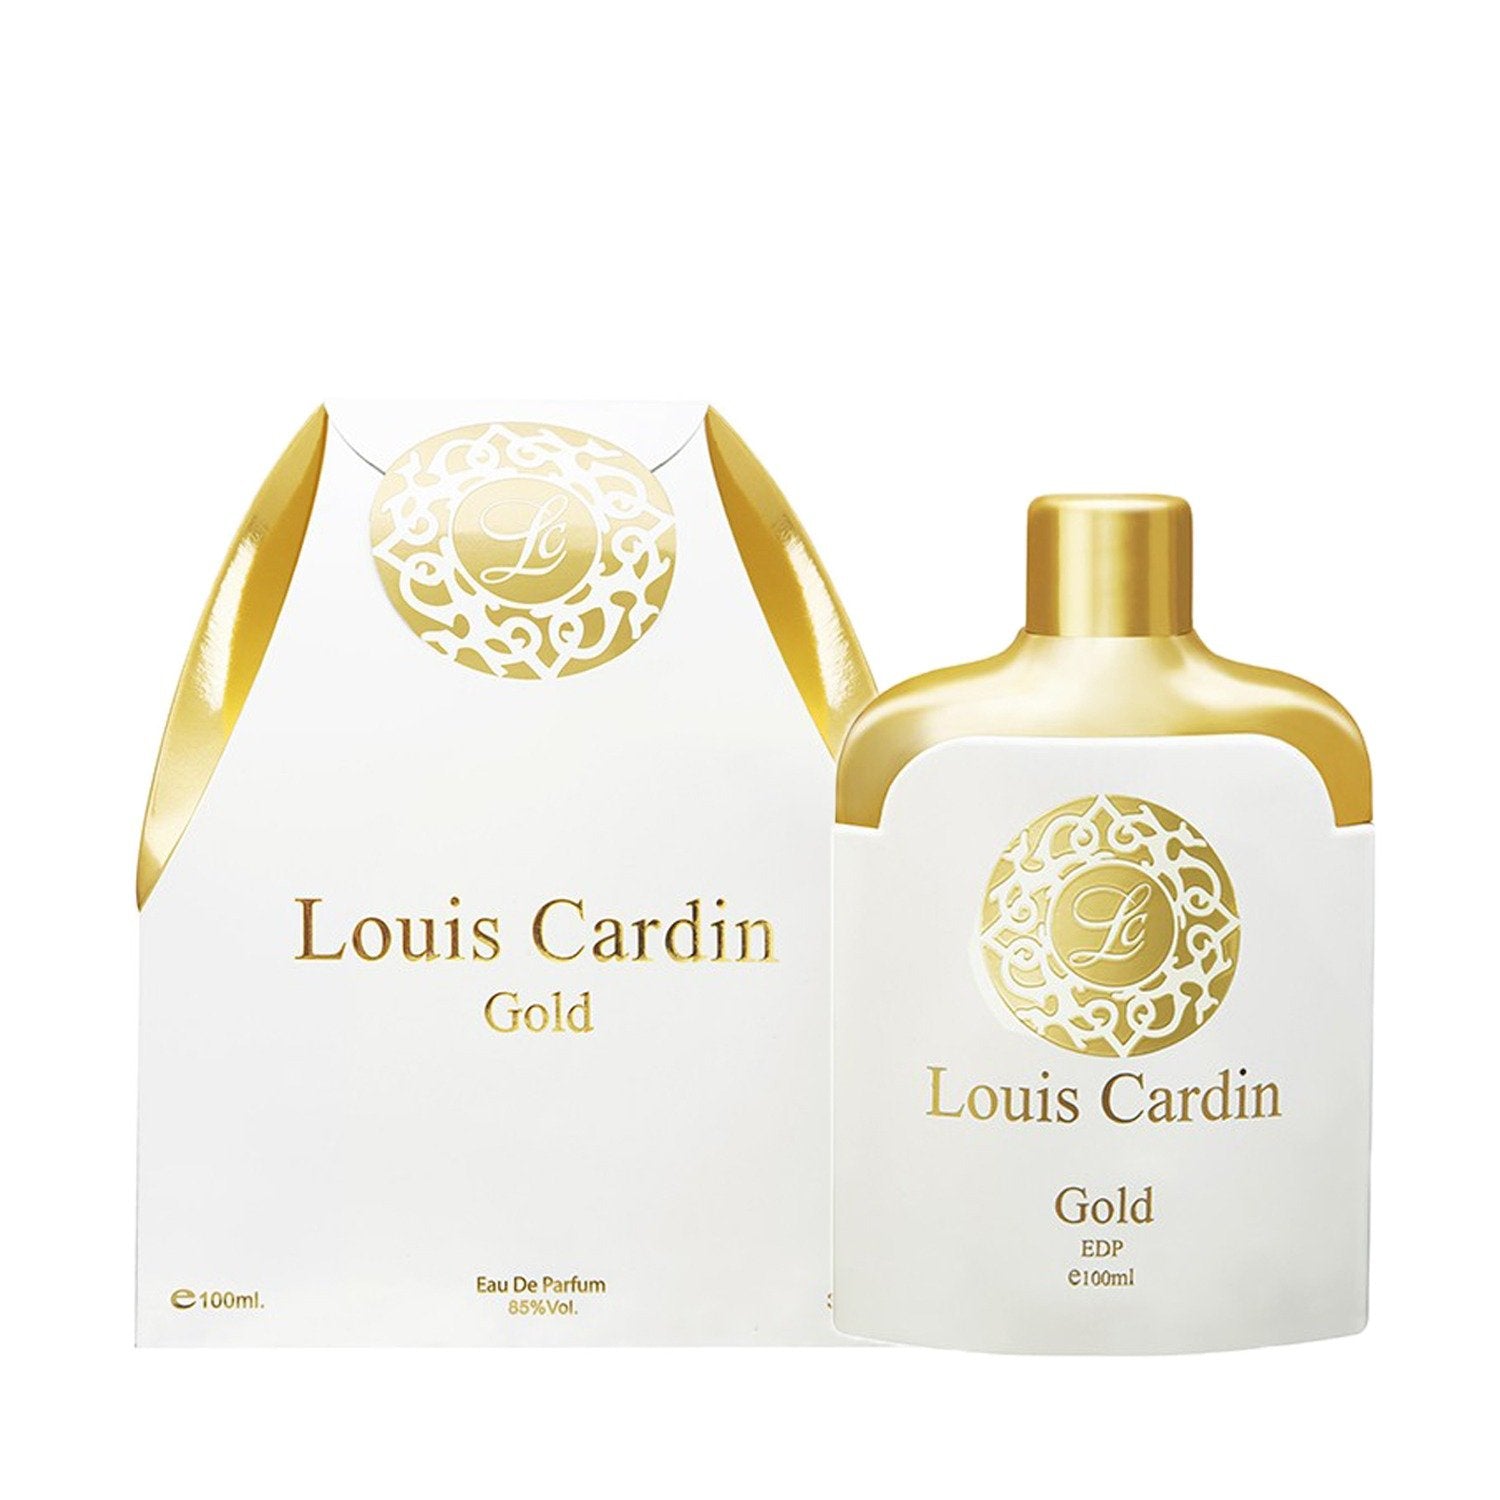 Louis Cardin Gold - Best men and women pefume cologne scent oud collection